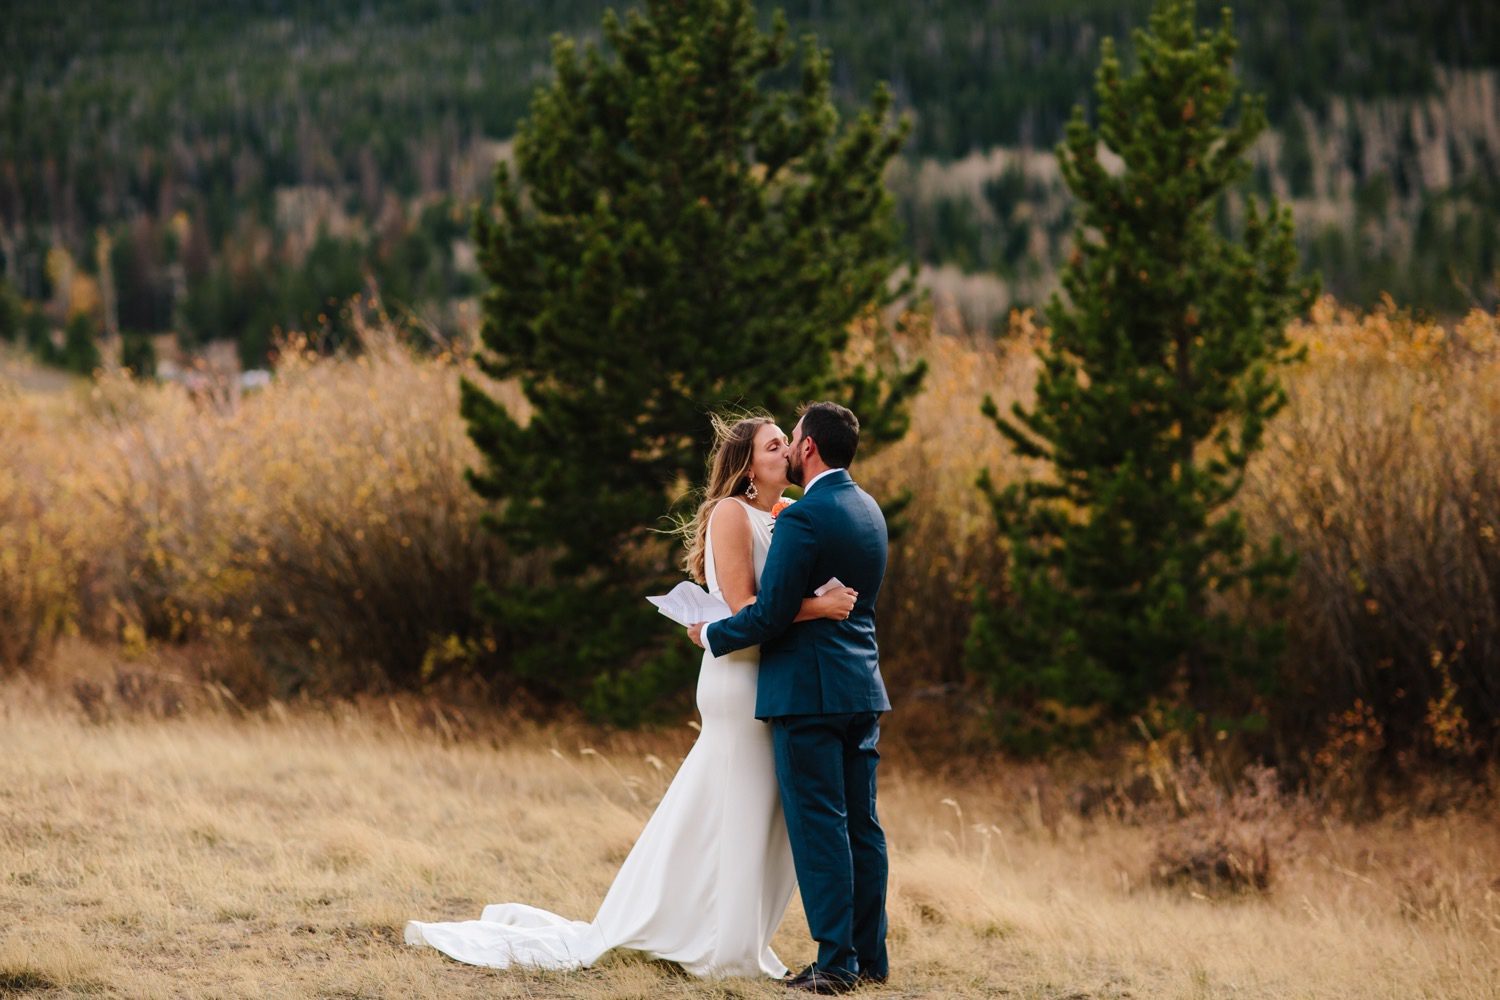 Estes Park Micro Wedding Elopement with first look in Rocky Mountain National Park, Micro Wedding, Small Wedding, Intimate Wedding, Elopement, Elopement Photography, Mountain Wedding, Mountain Elopement, Elopement Planning, Elopement Ideas, Elopement Inspiration, Rocky Mountain National Park, Eloping with family, Colorado elopement guide, Ideas for eloping, Pandemic wedding, COVID-19 Wedding, Covid-19 elopement, Fall Wedding, Fall Elopement, Rocky Mountain Bride, Martha Stewart Weddings